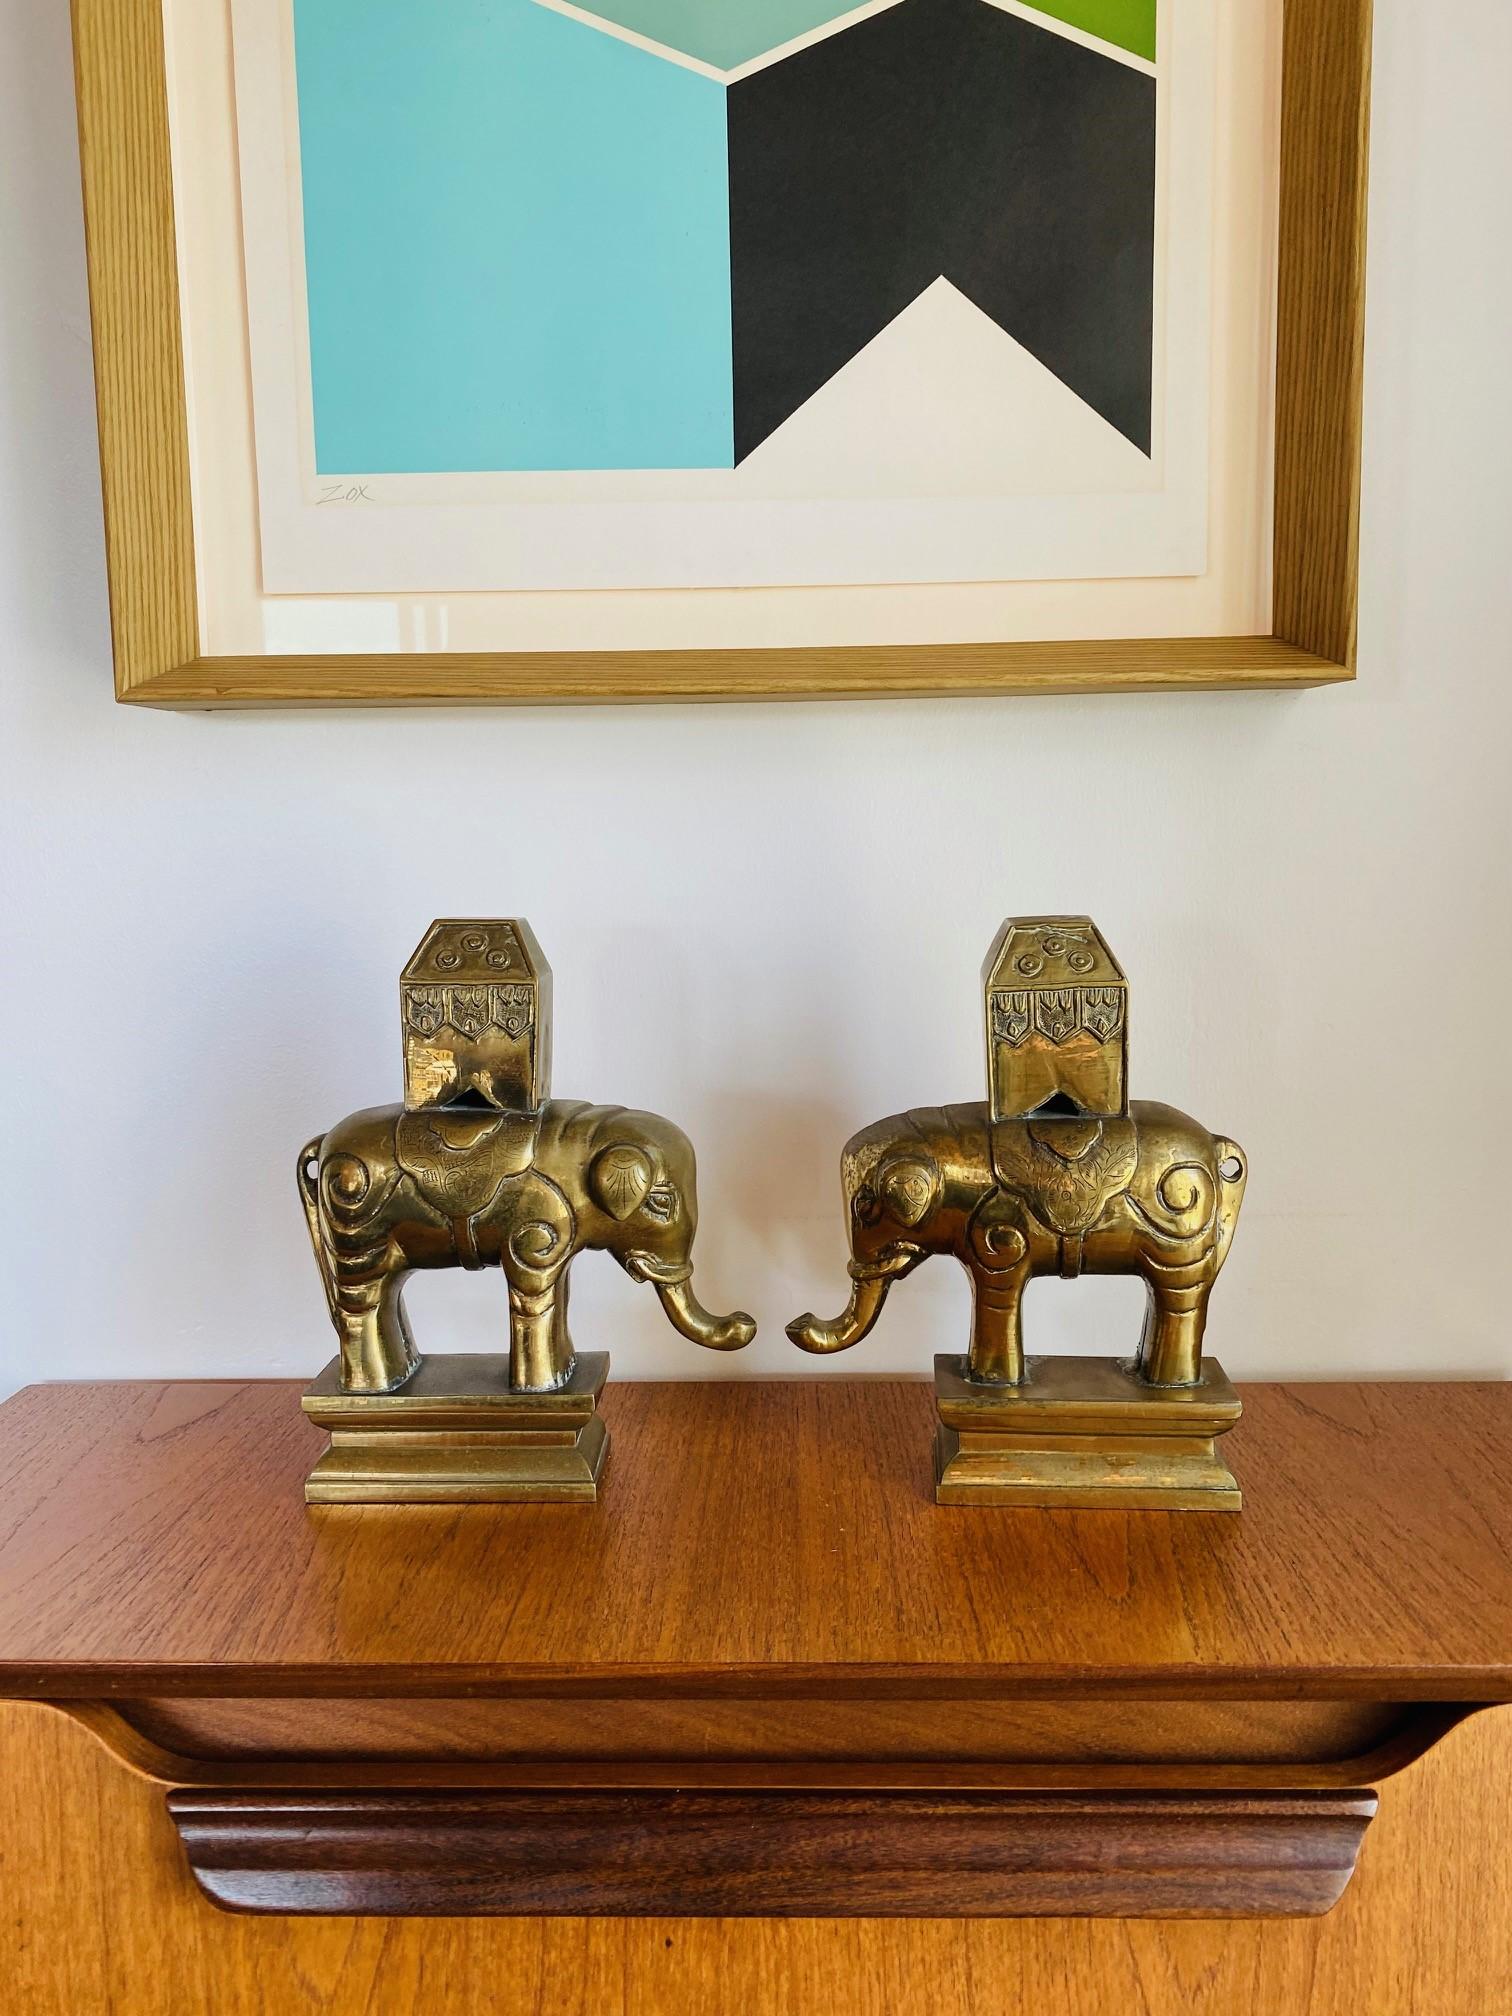 Vintage 1940s Pair of Sculptural Elephant Bookends in Solid Brass For Sale 6